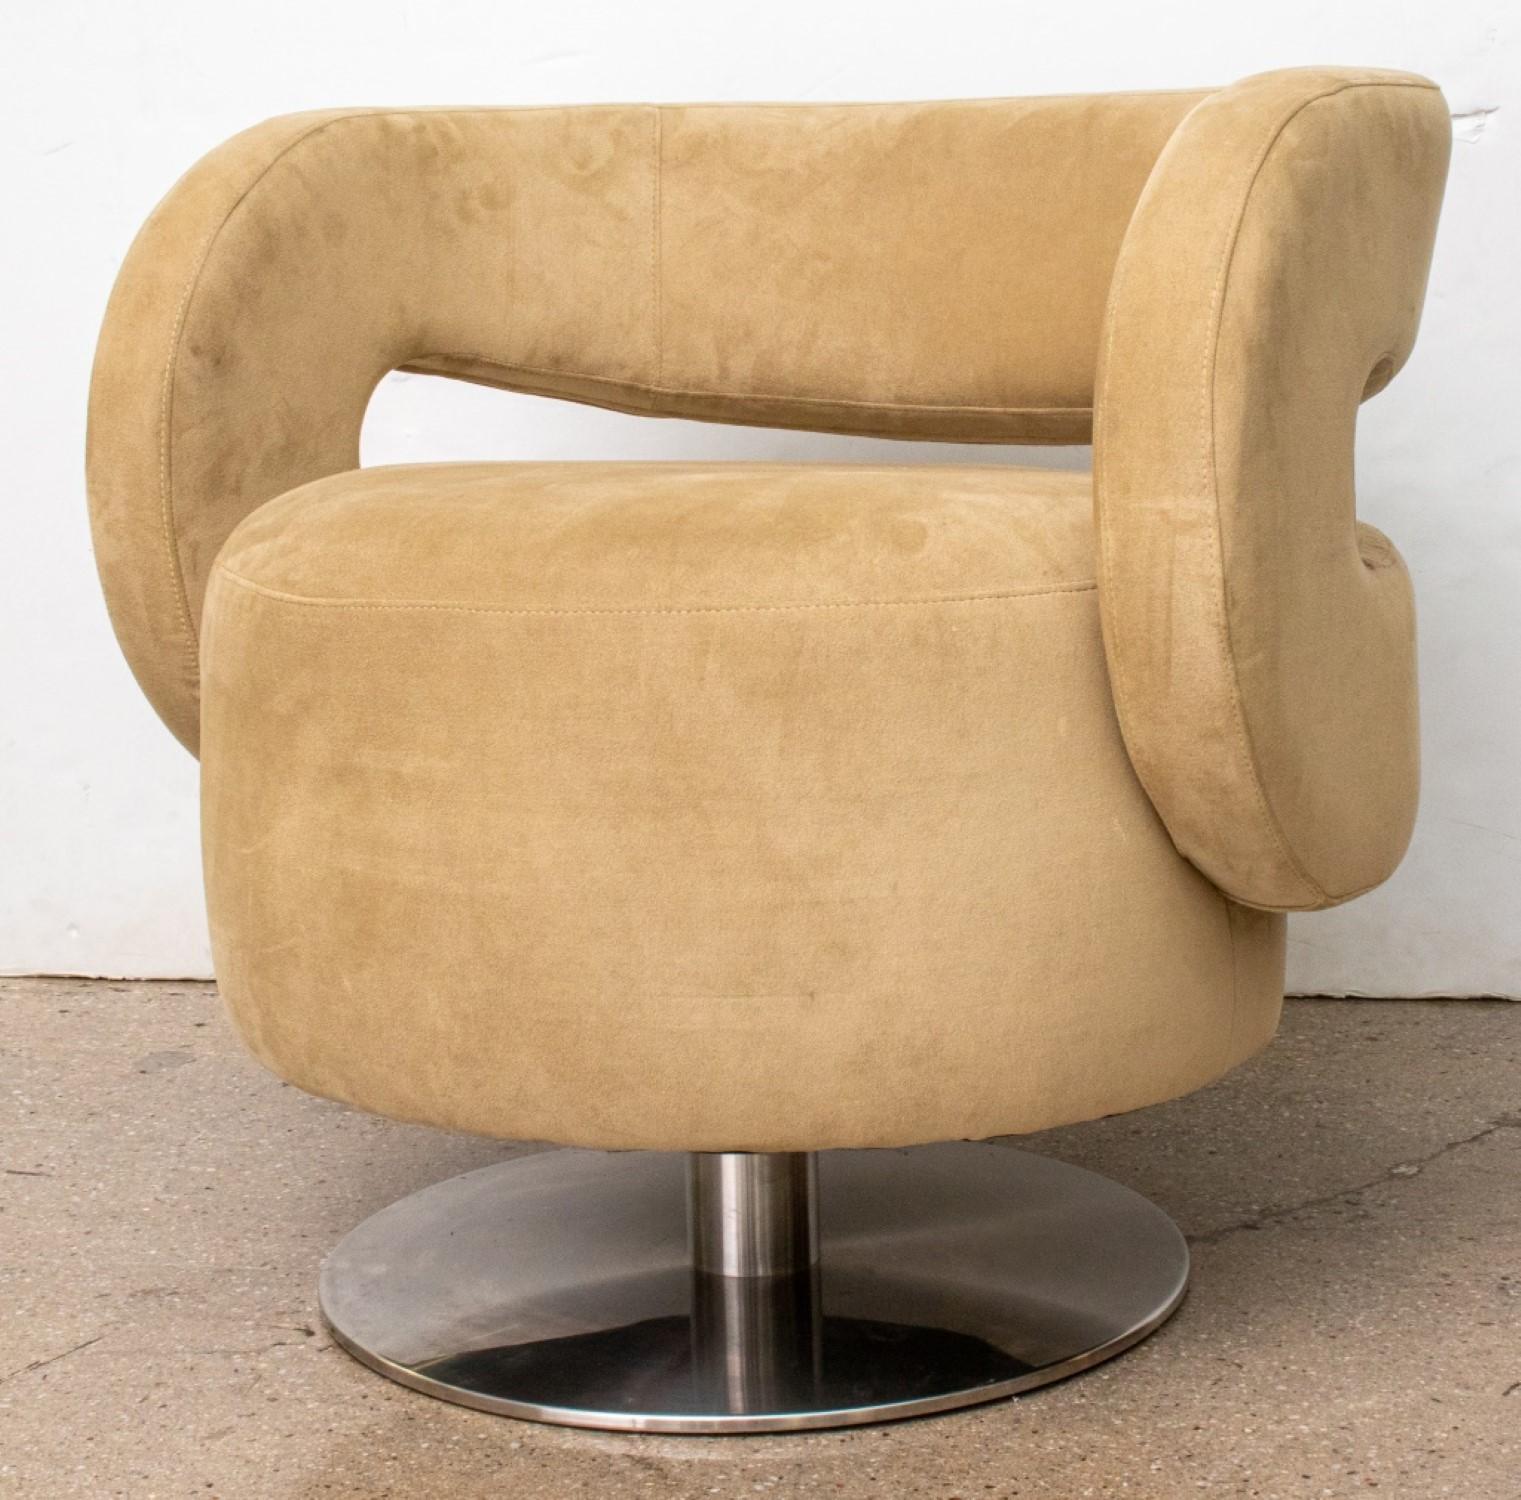 The dimensions for the Milo Baughman manner swivel lounge chair are:

Dealer: S138XX